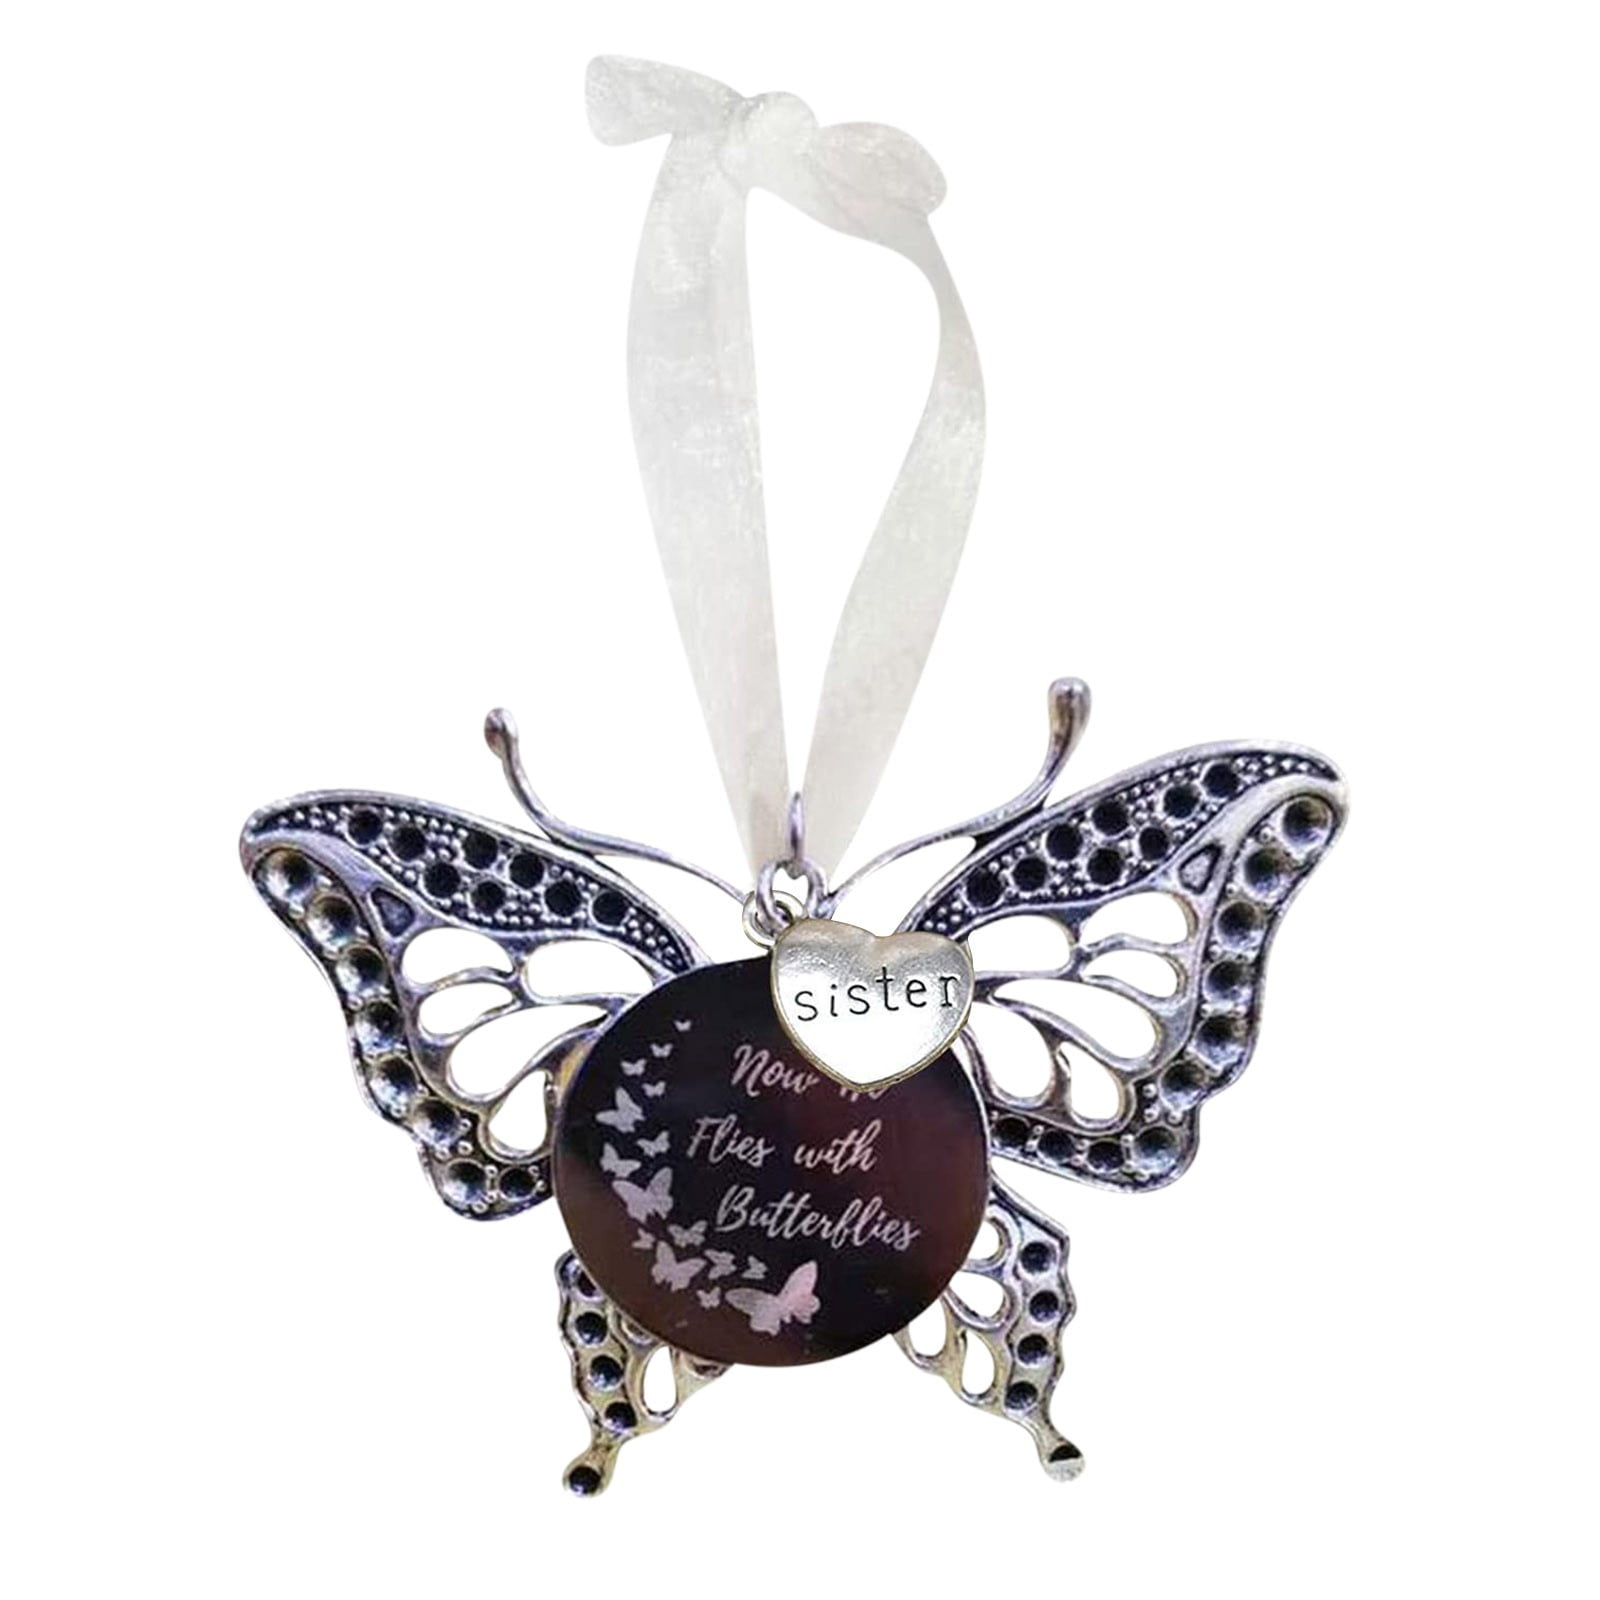 Creative Butterfly Decorations Ornaments For Christmas Tree Accessories At Homes 